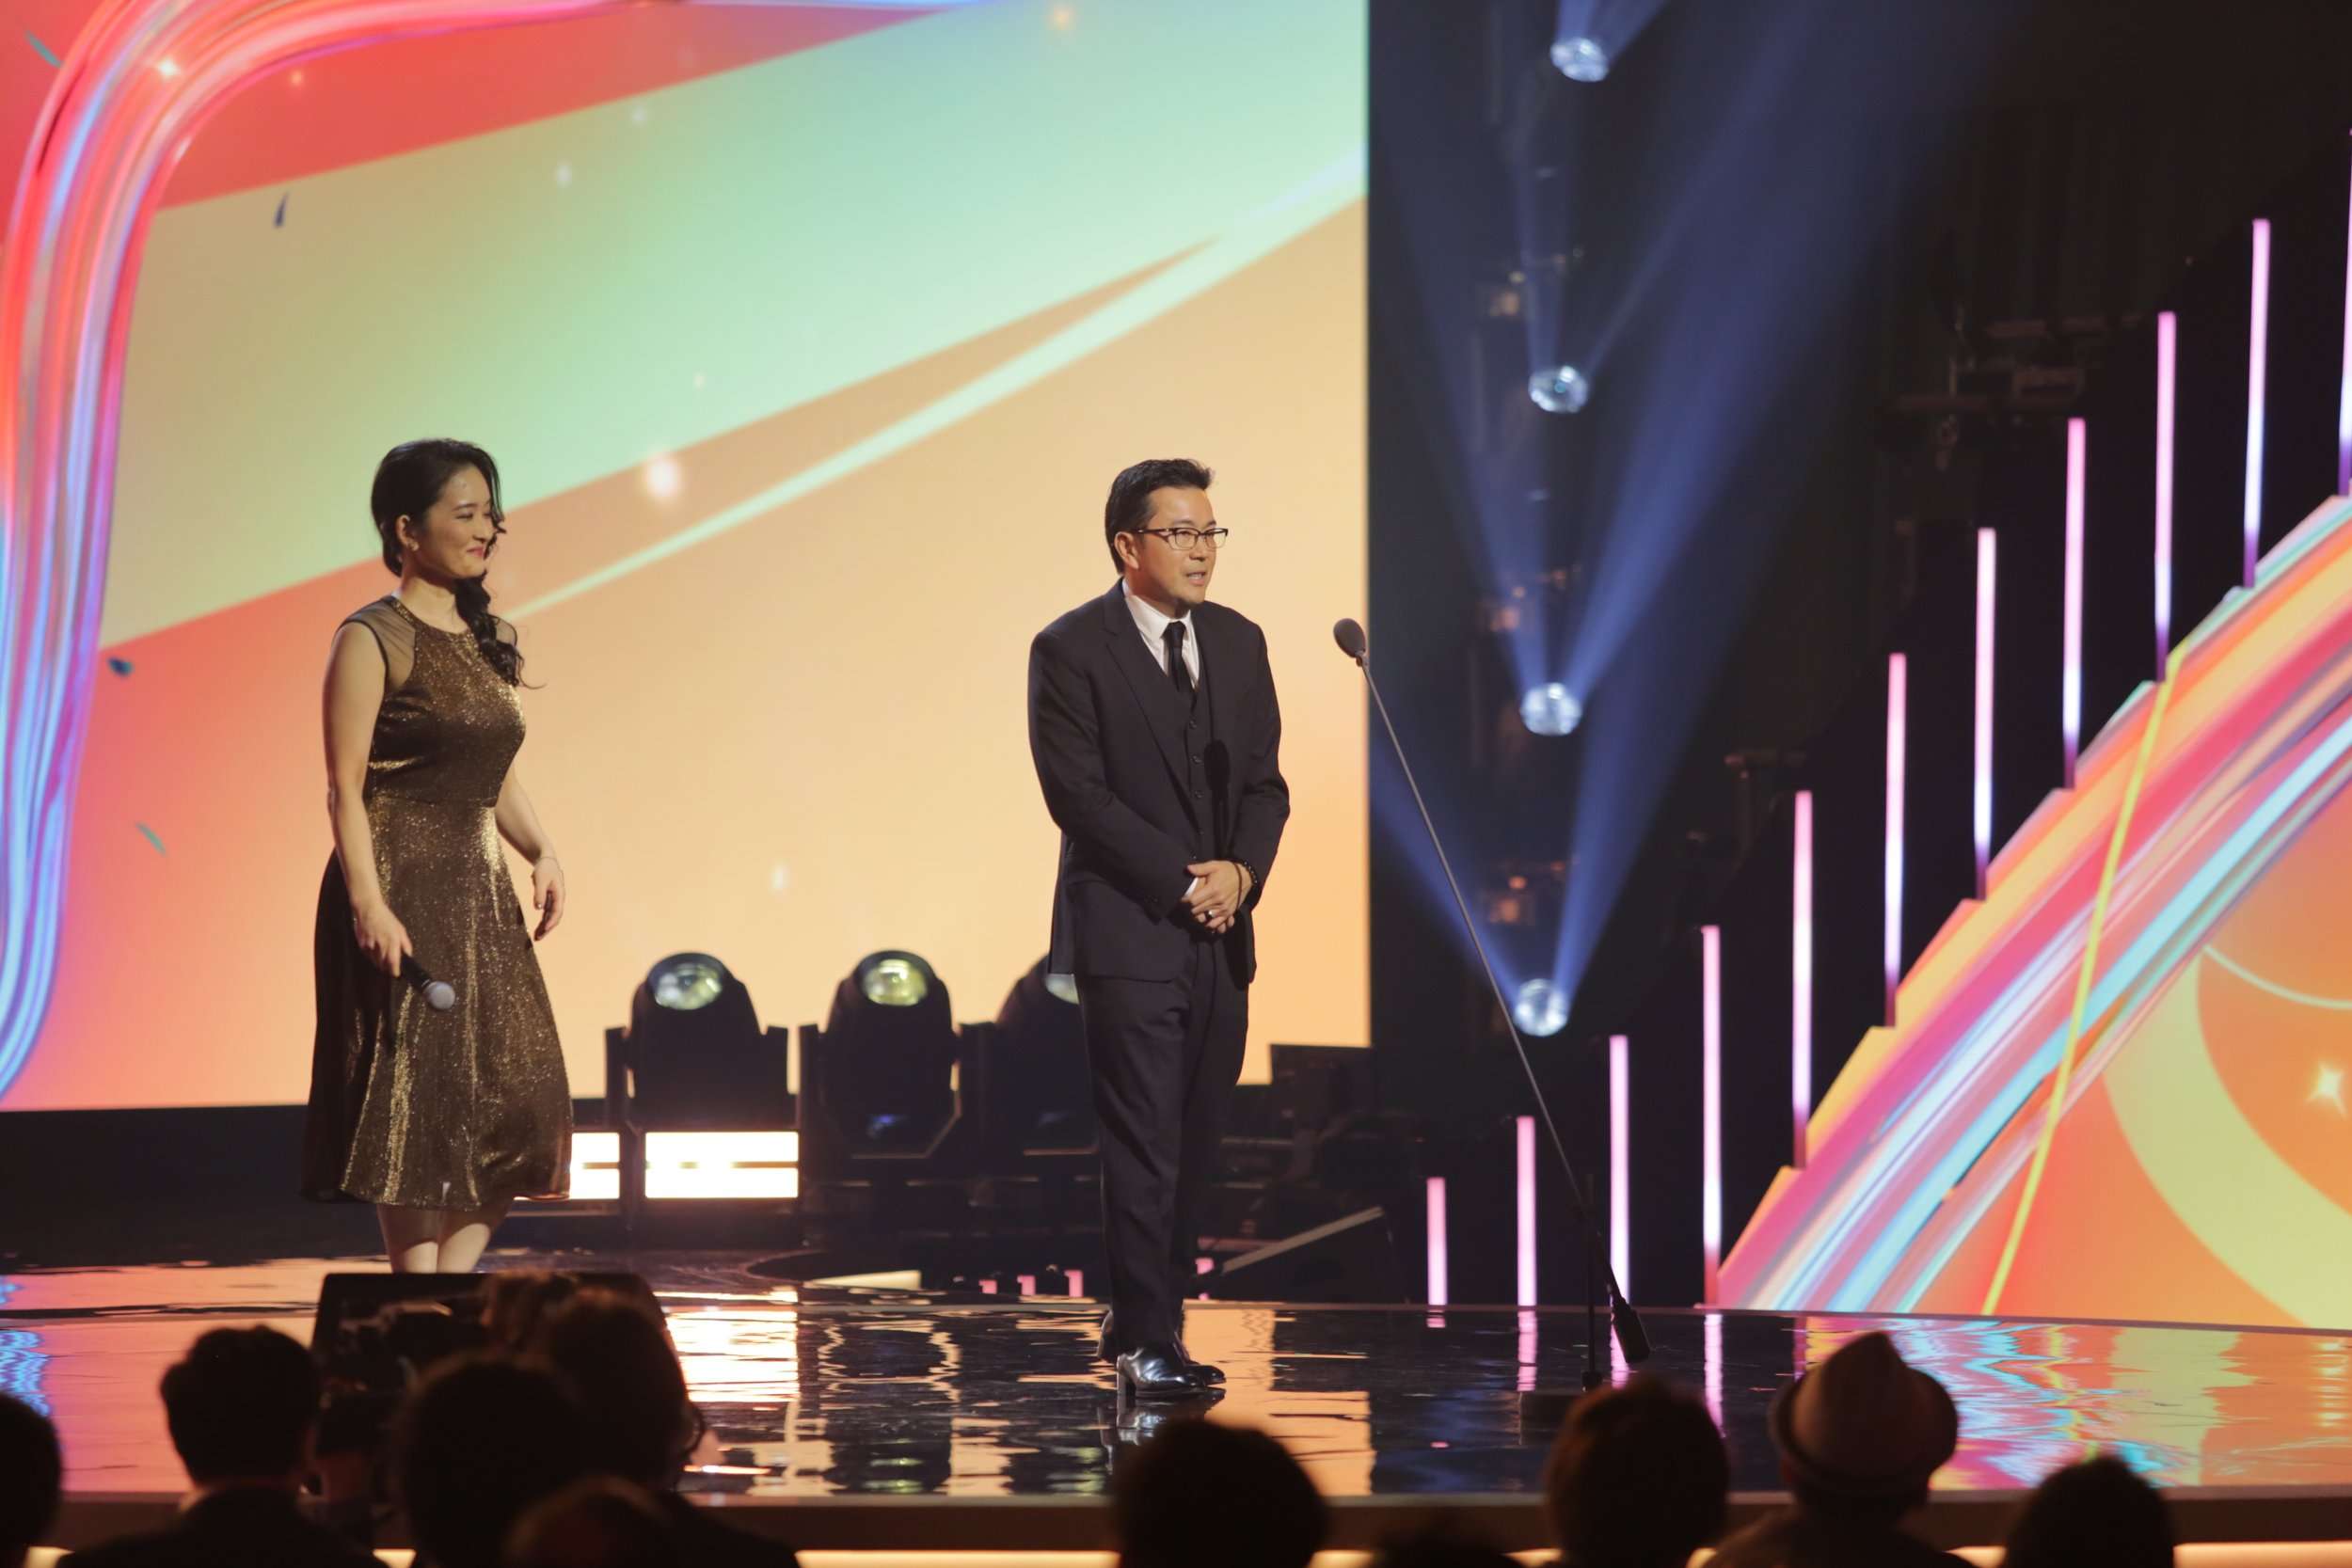 Director Justin Lin at the 2023 Crunchyroll Anime Awards live from Tokyo on Saturday, March 4, 2023.JPG